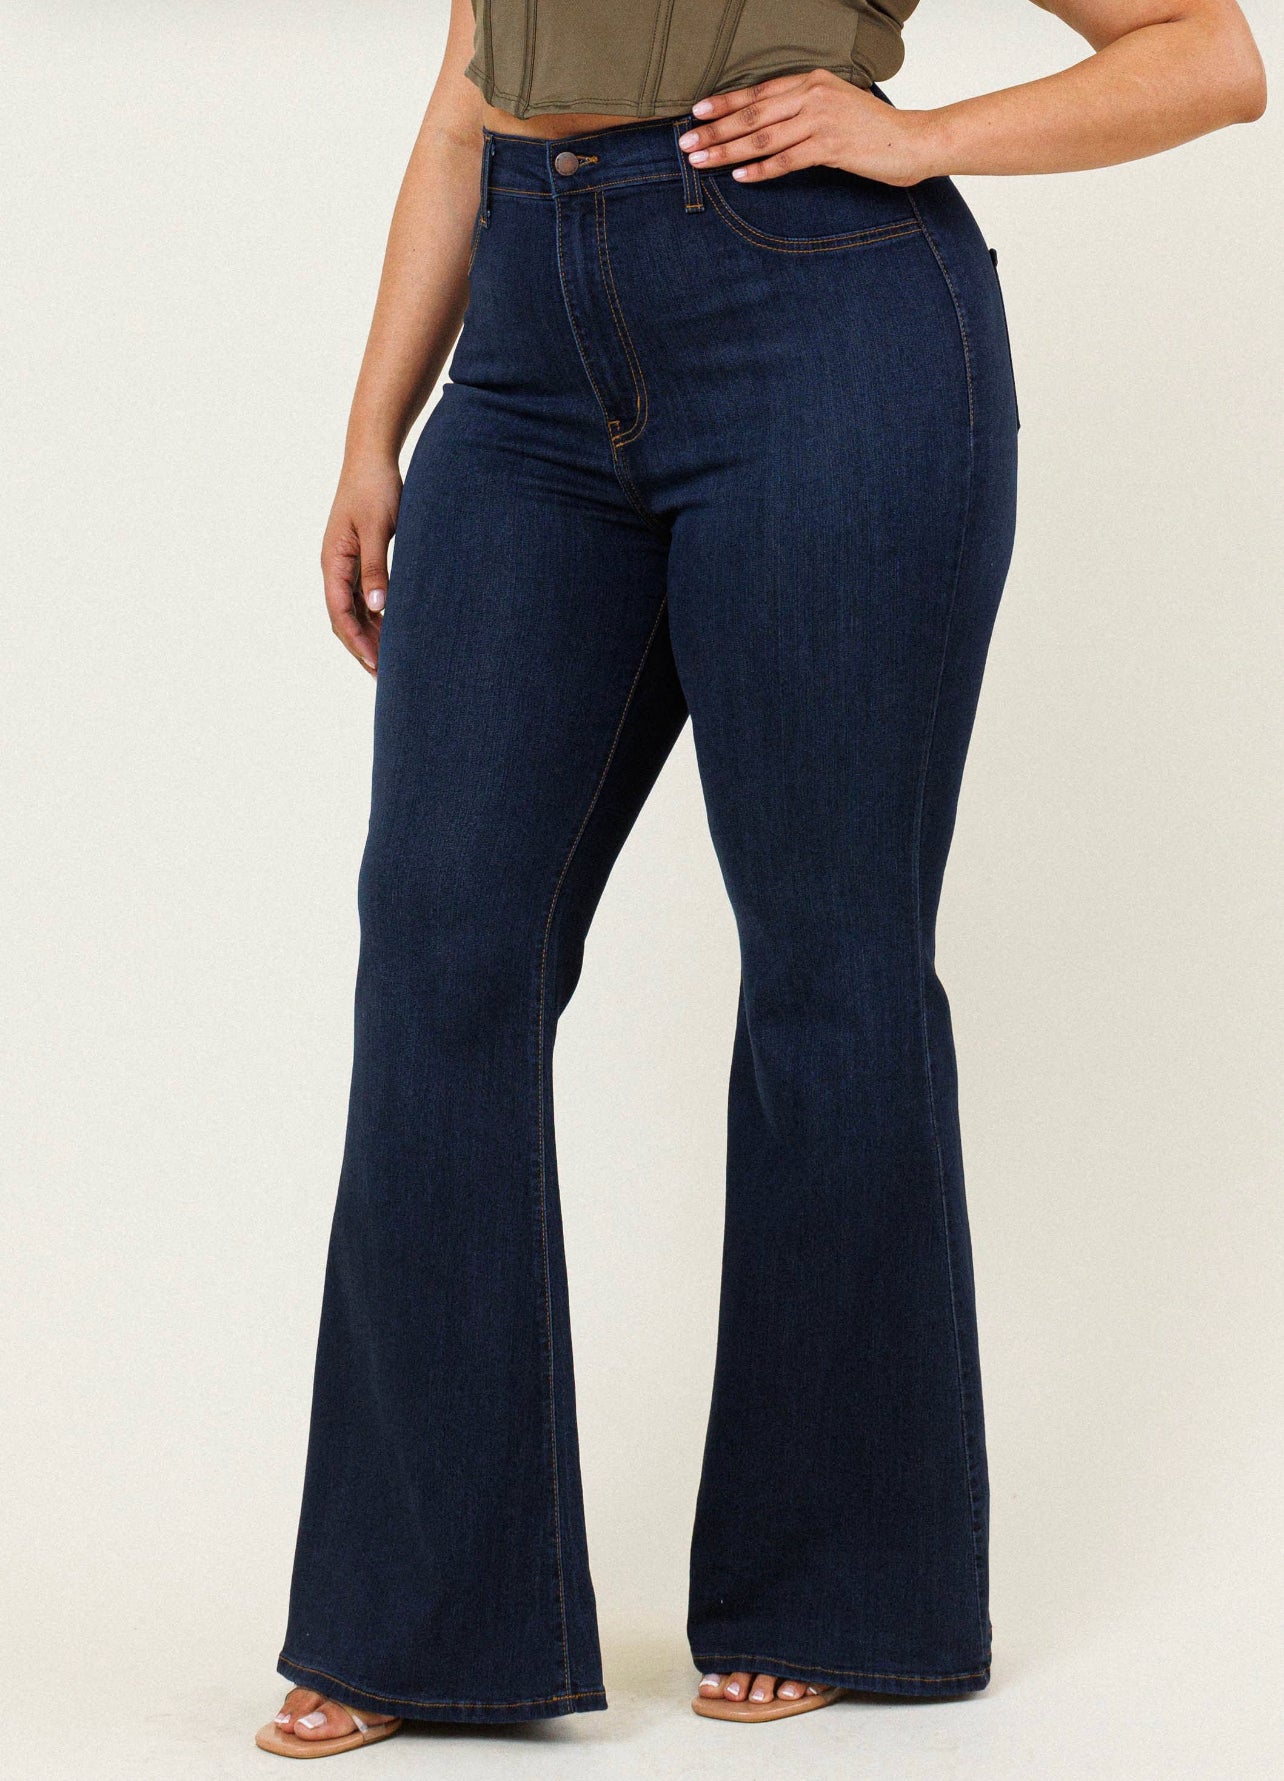 Jeans  Plus Size Dark Wash High Rise Flared Jeans from Vibrant MIU